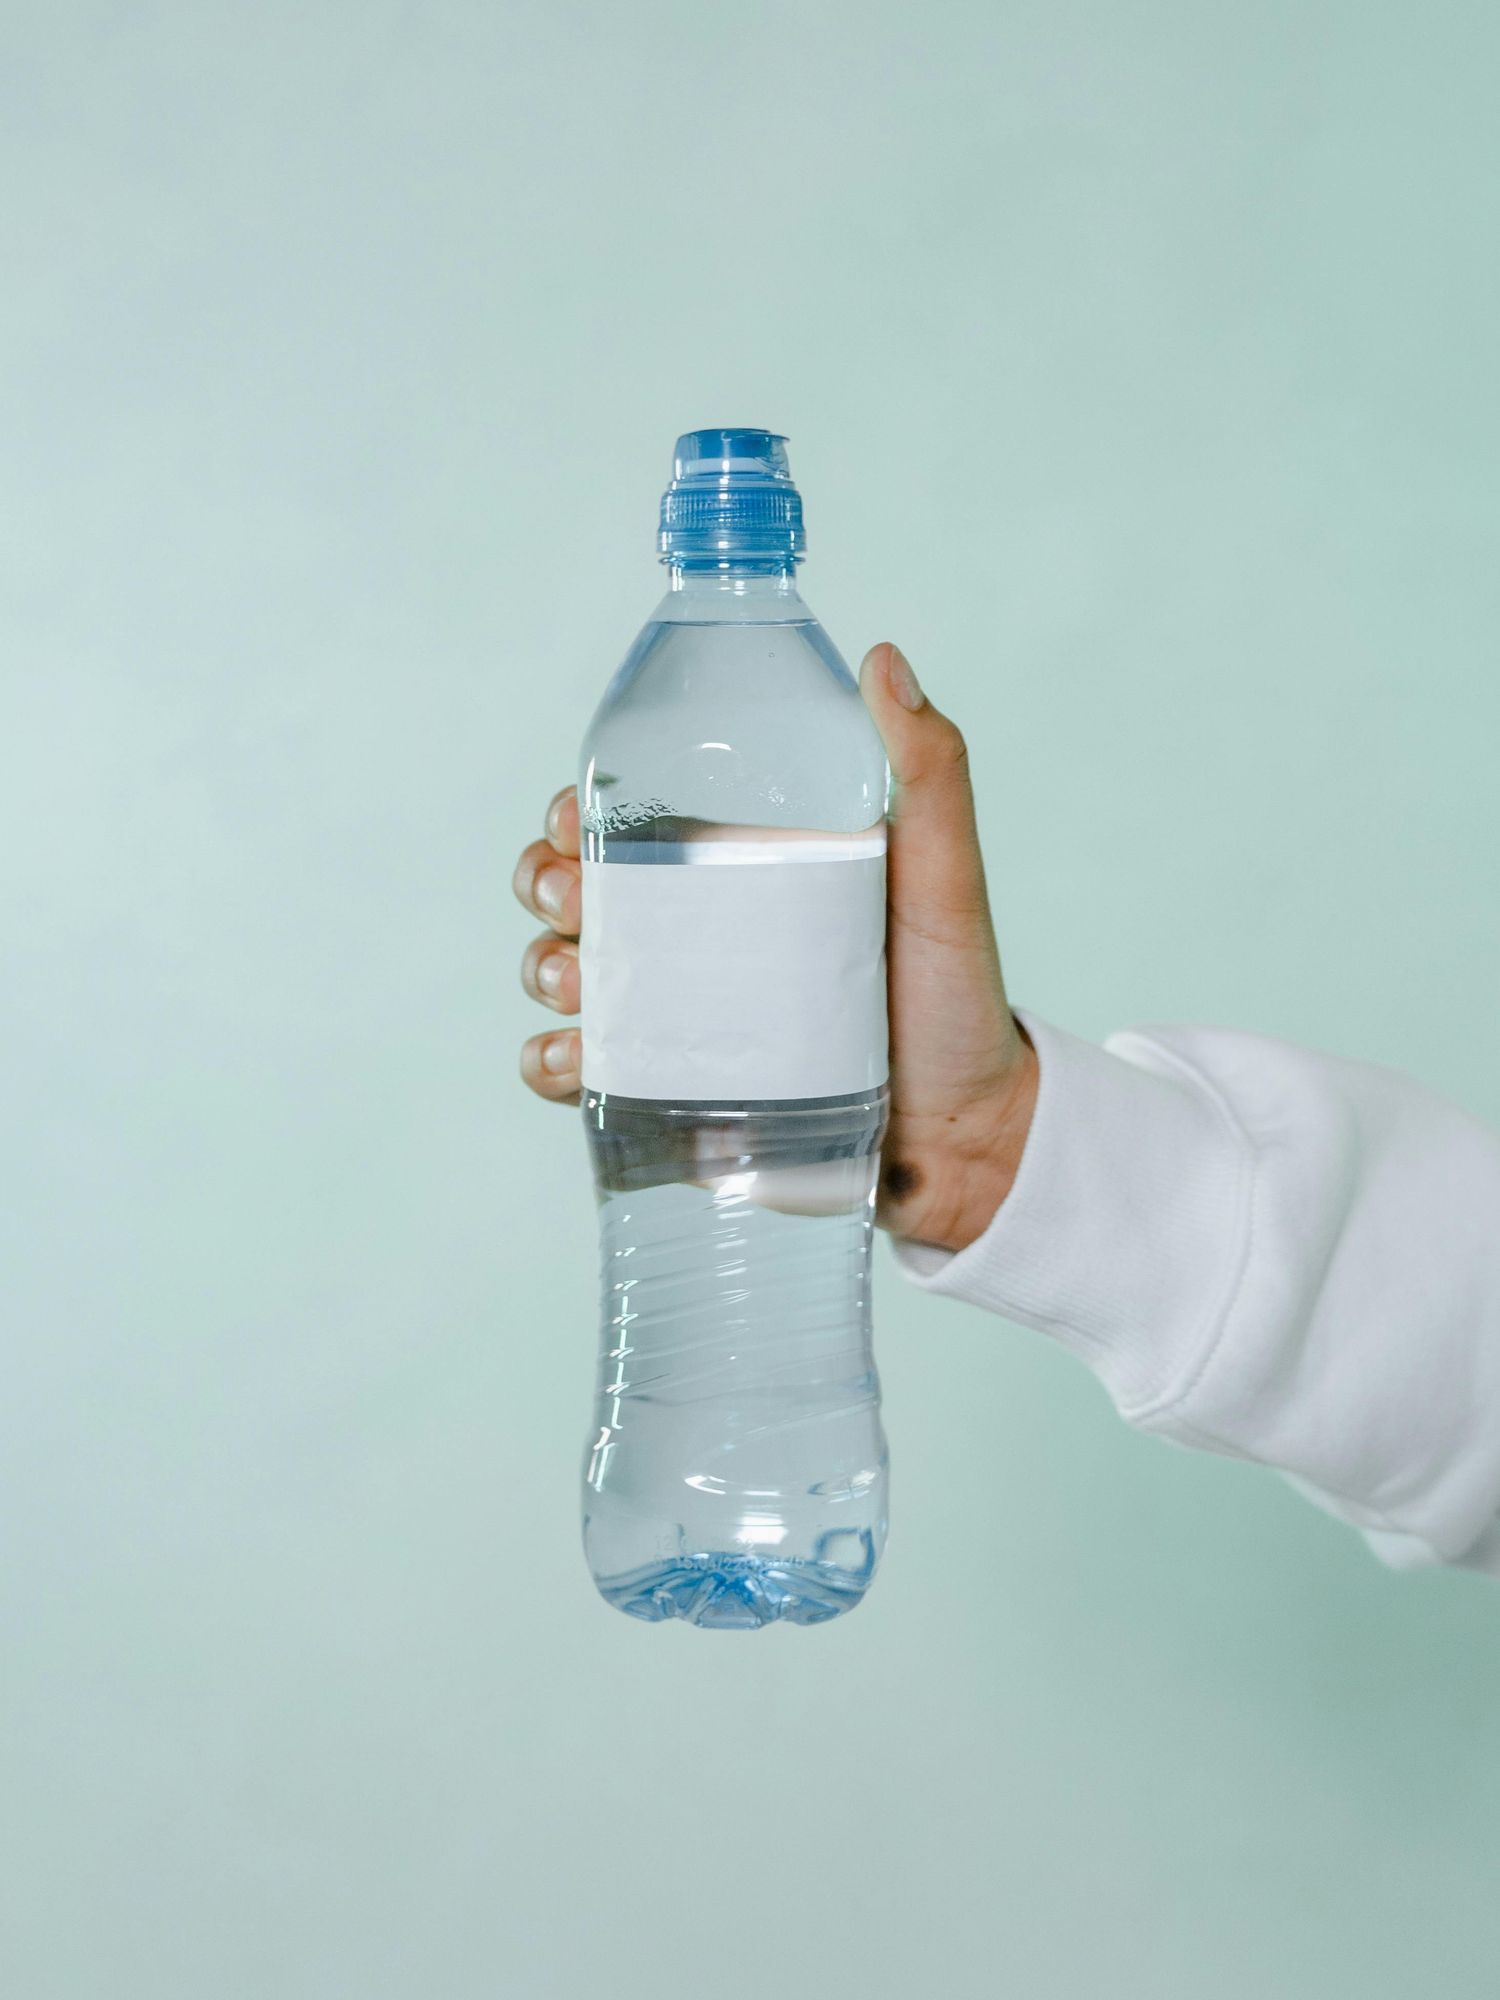 Is bottled water safe to drink?